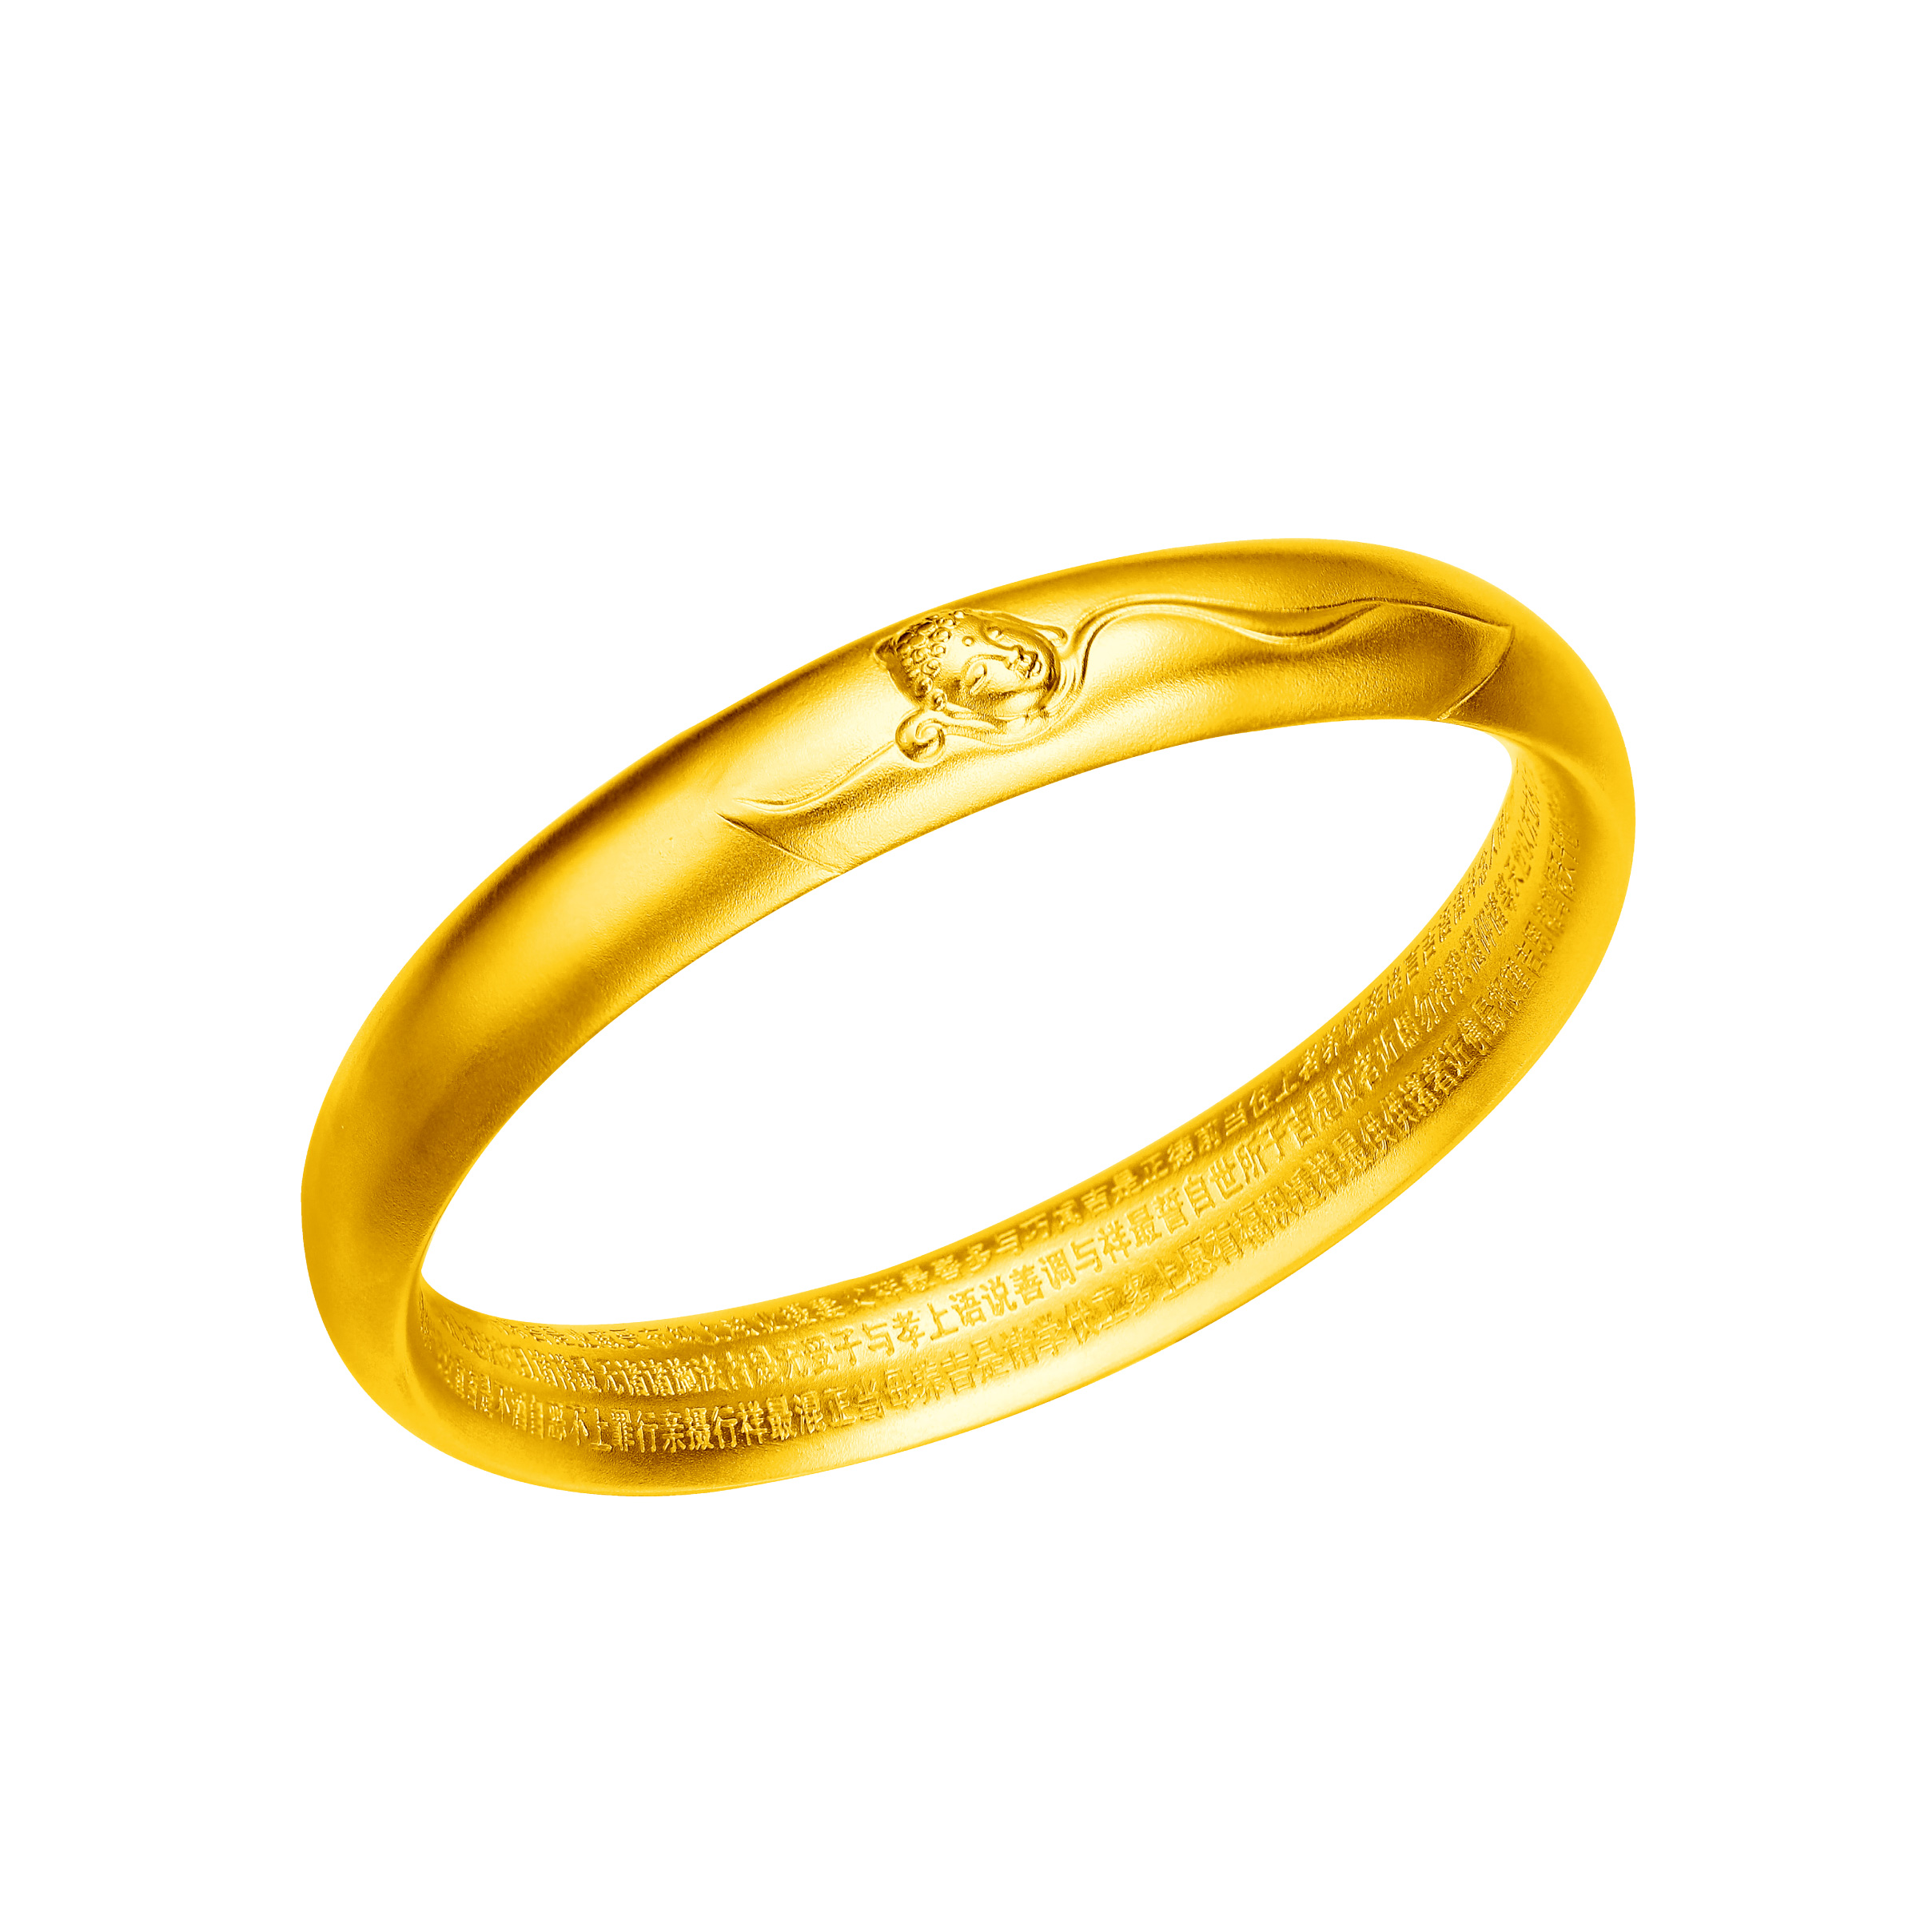 Antique Gold "Blessings" Gold Bangle